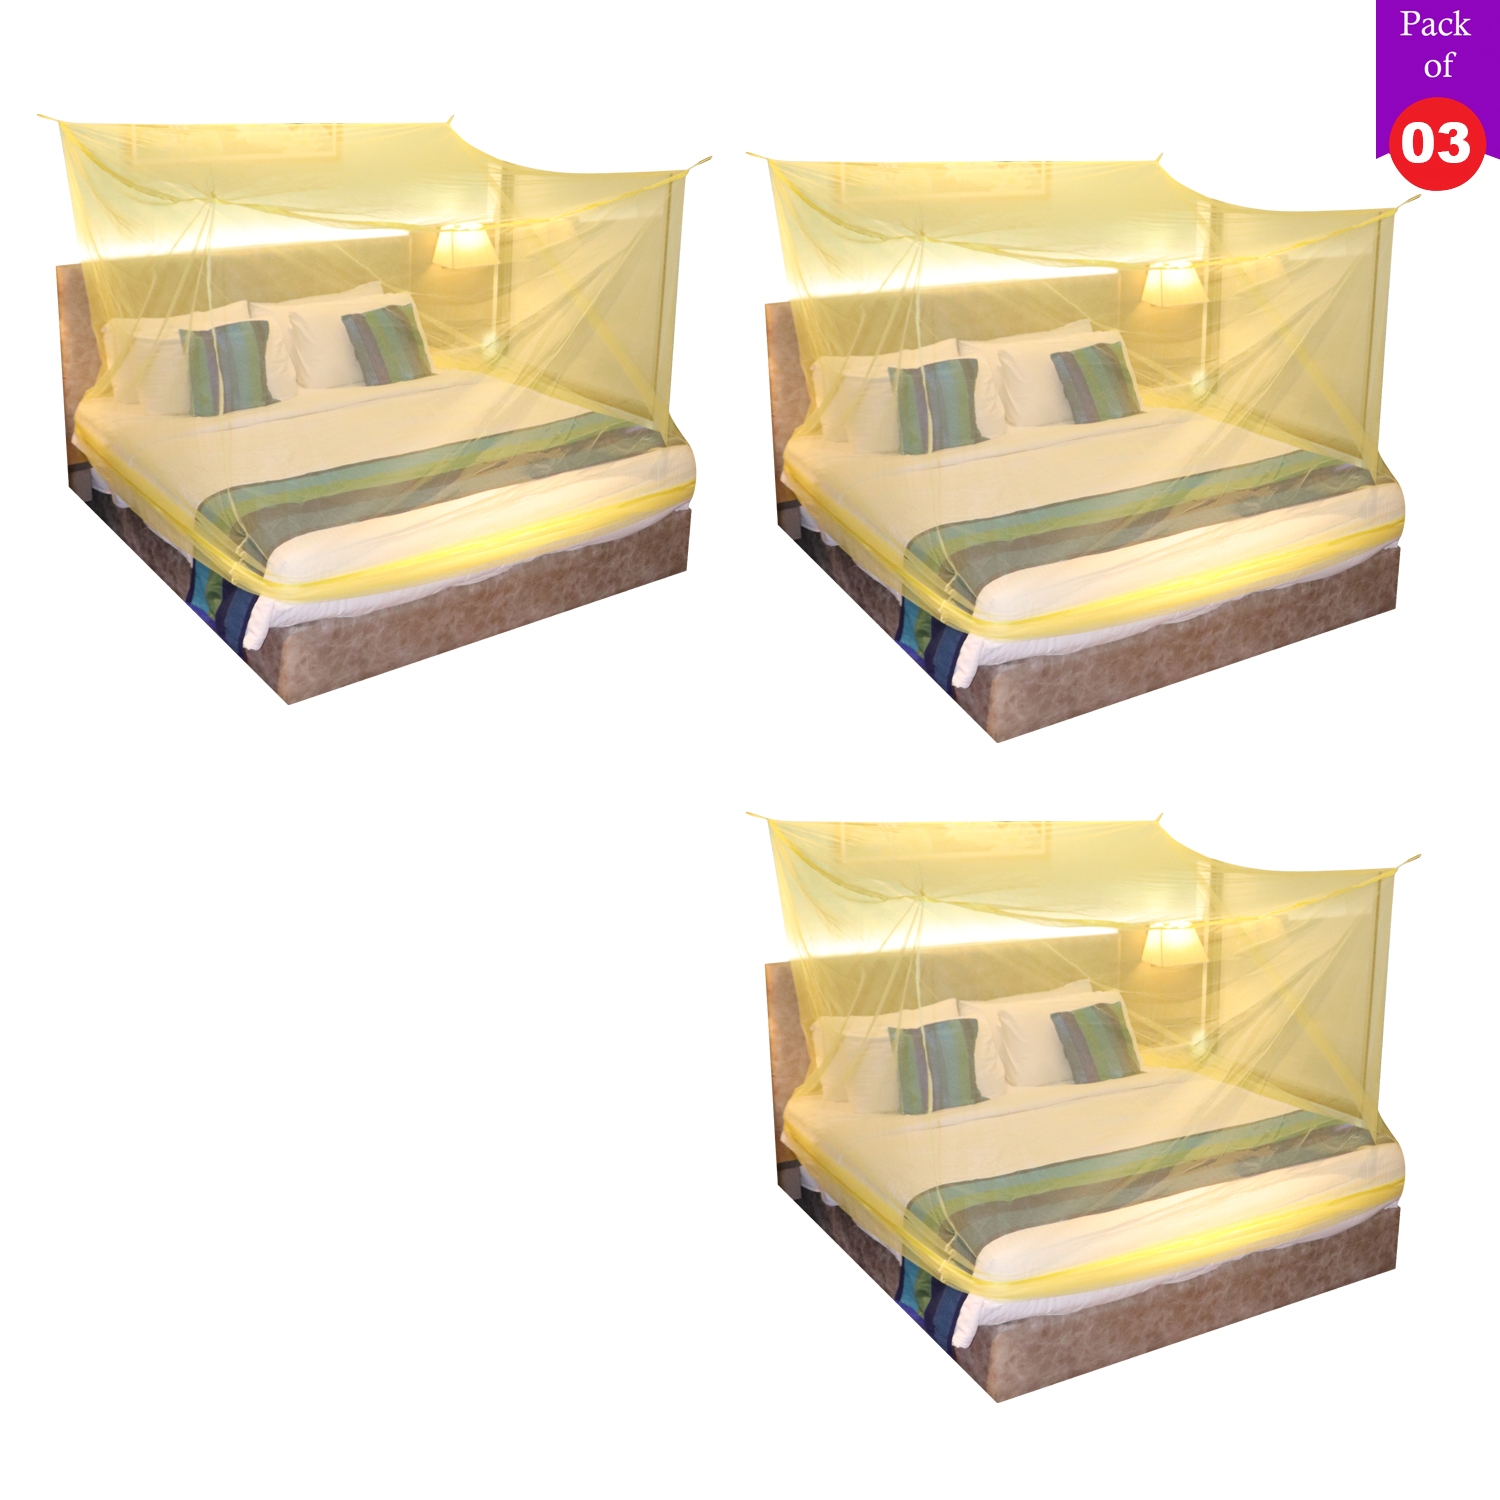 SILVER SHINE | Mosquito Net for Double Bed, King-Size, Square Hanging Foldable Polyester Net YellowPack of 3 2